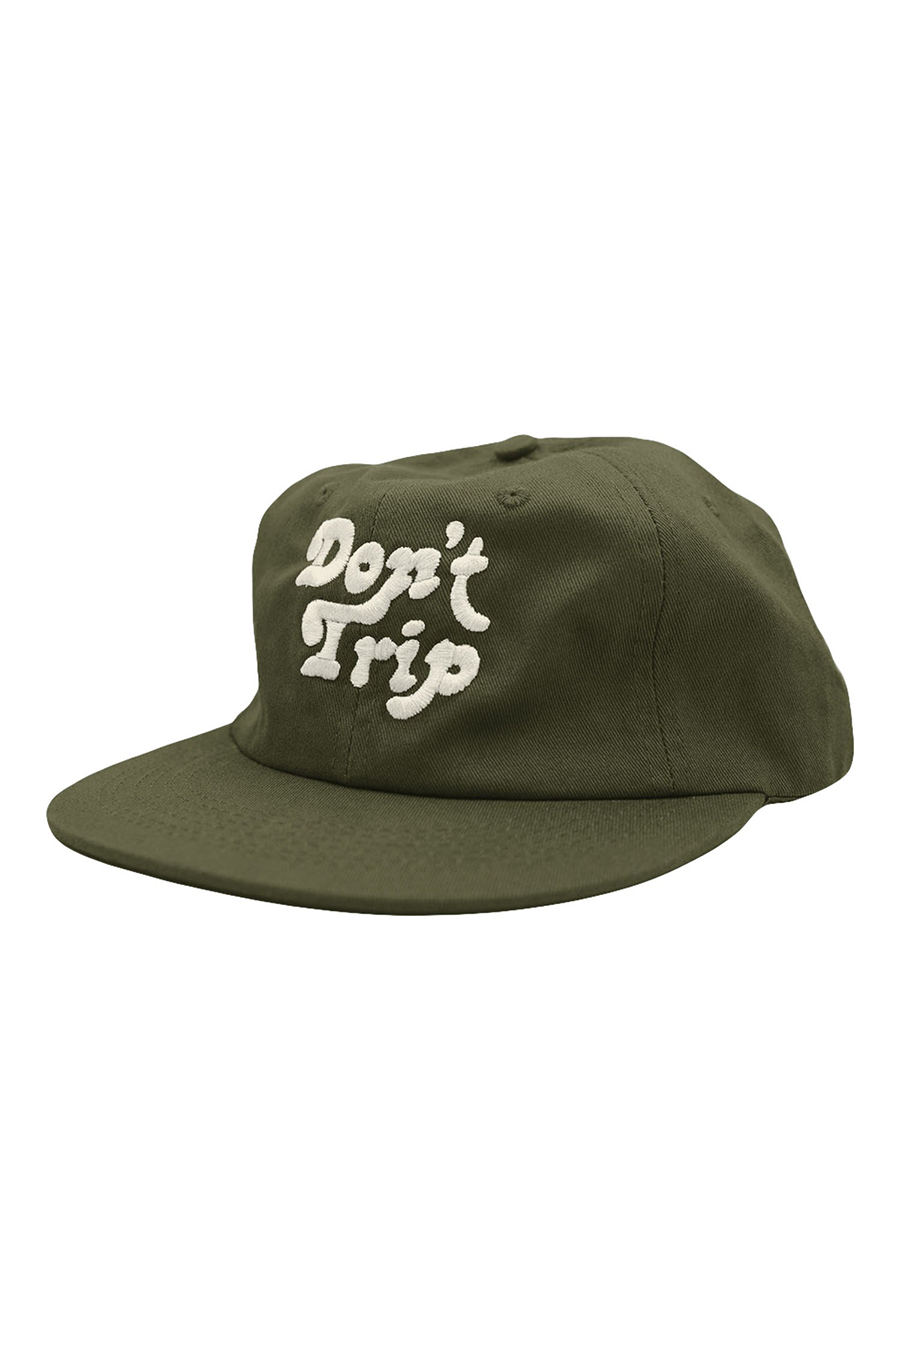 Don't Trip Unconstructed Hat | Olive - Main Image Number 1 of 1